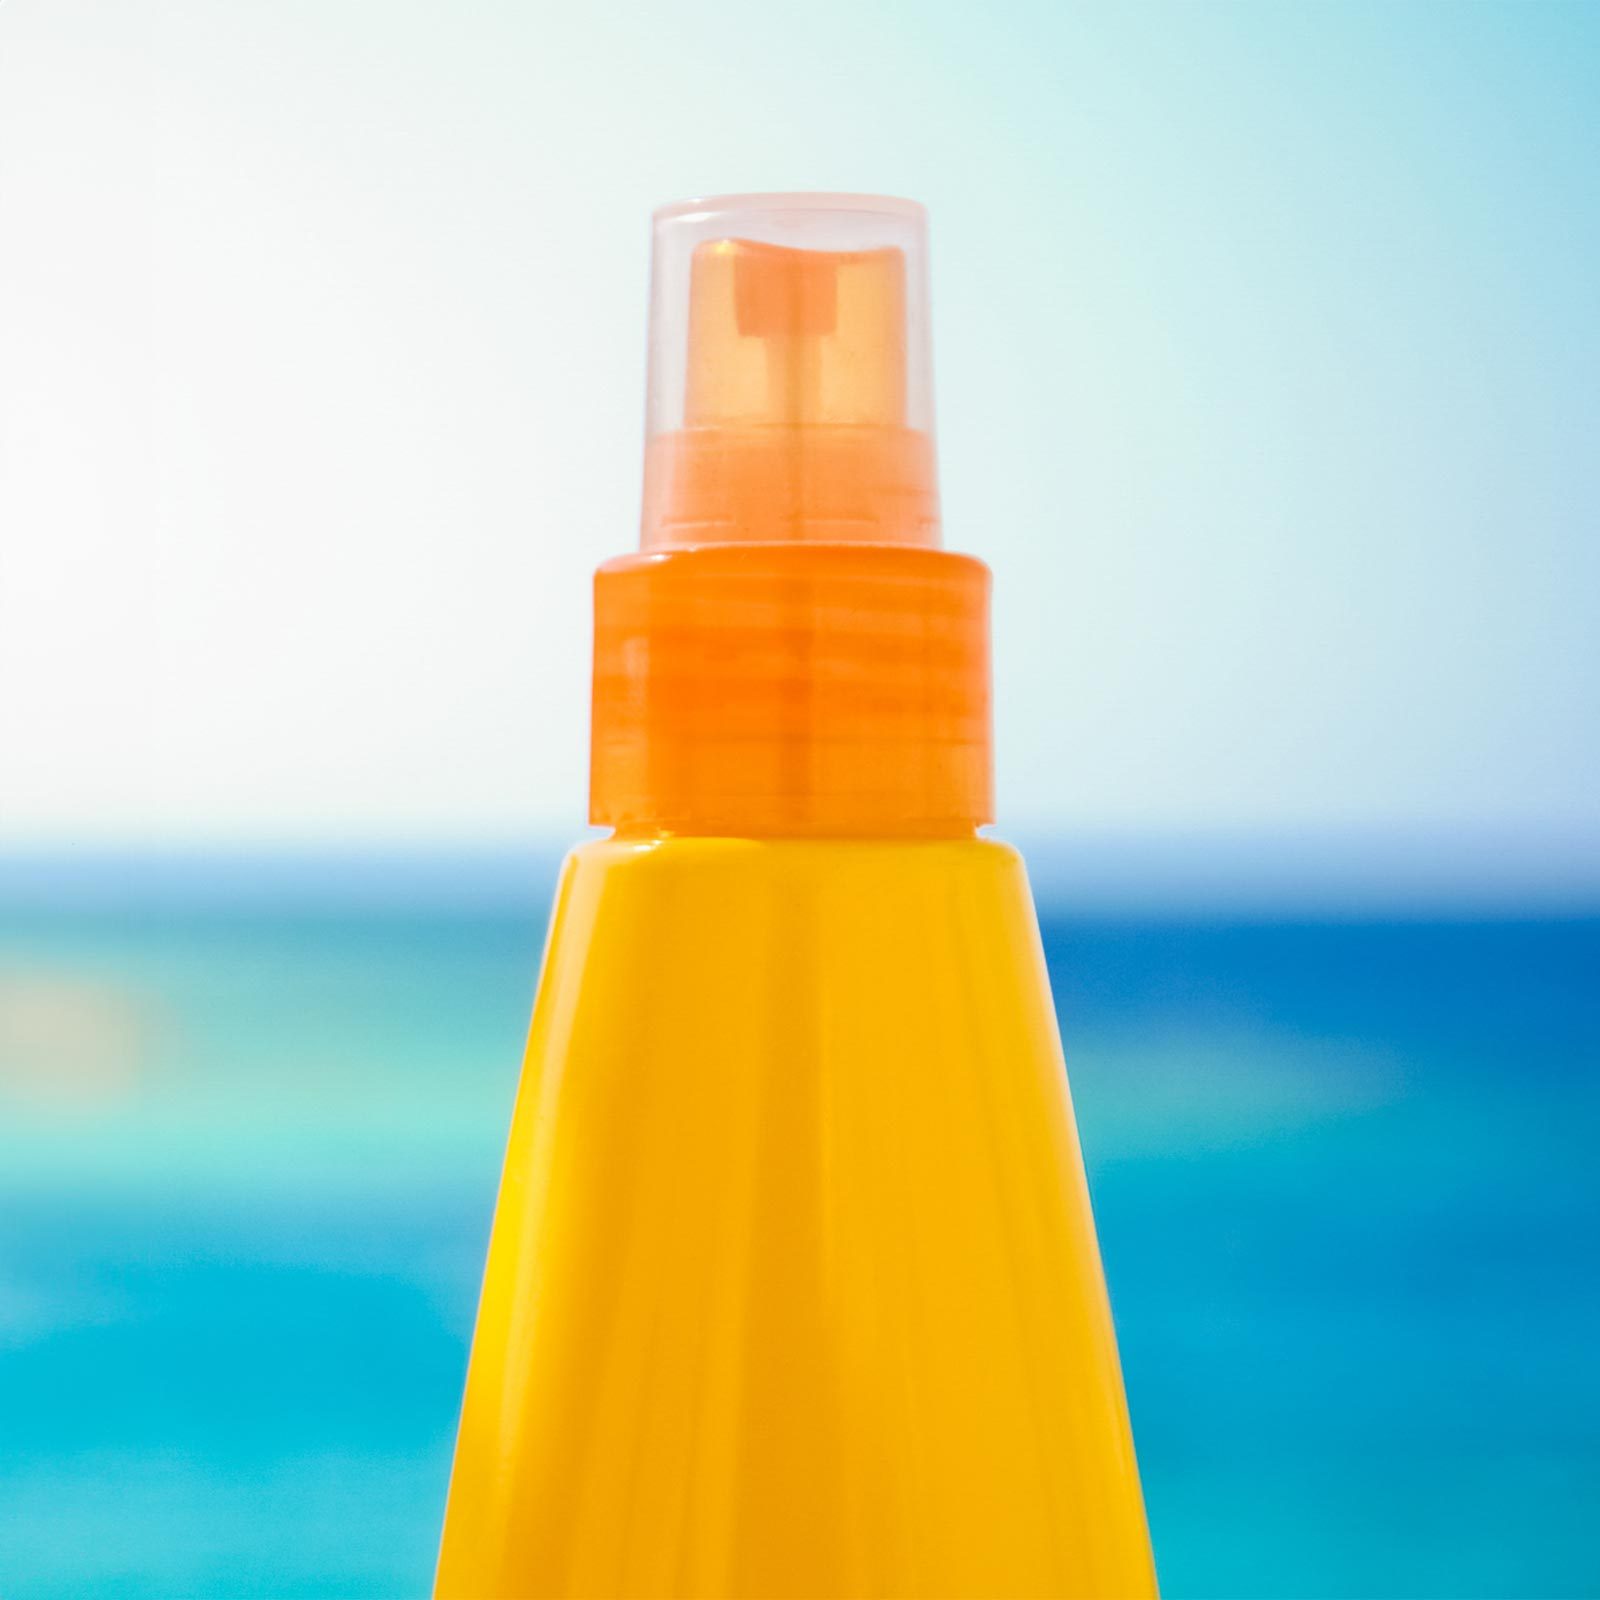 orange sunscreen bottle on a sunny day with blue sky and water in the background